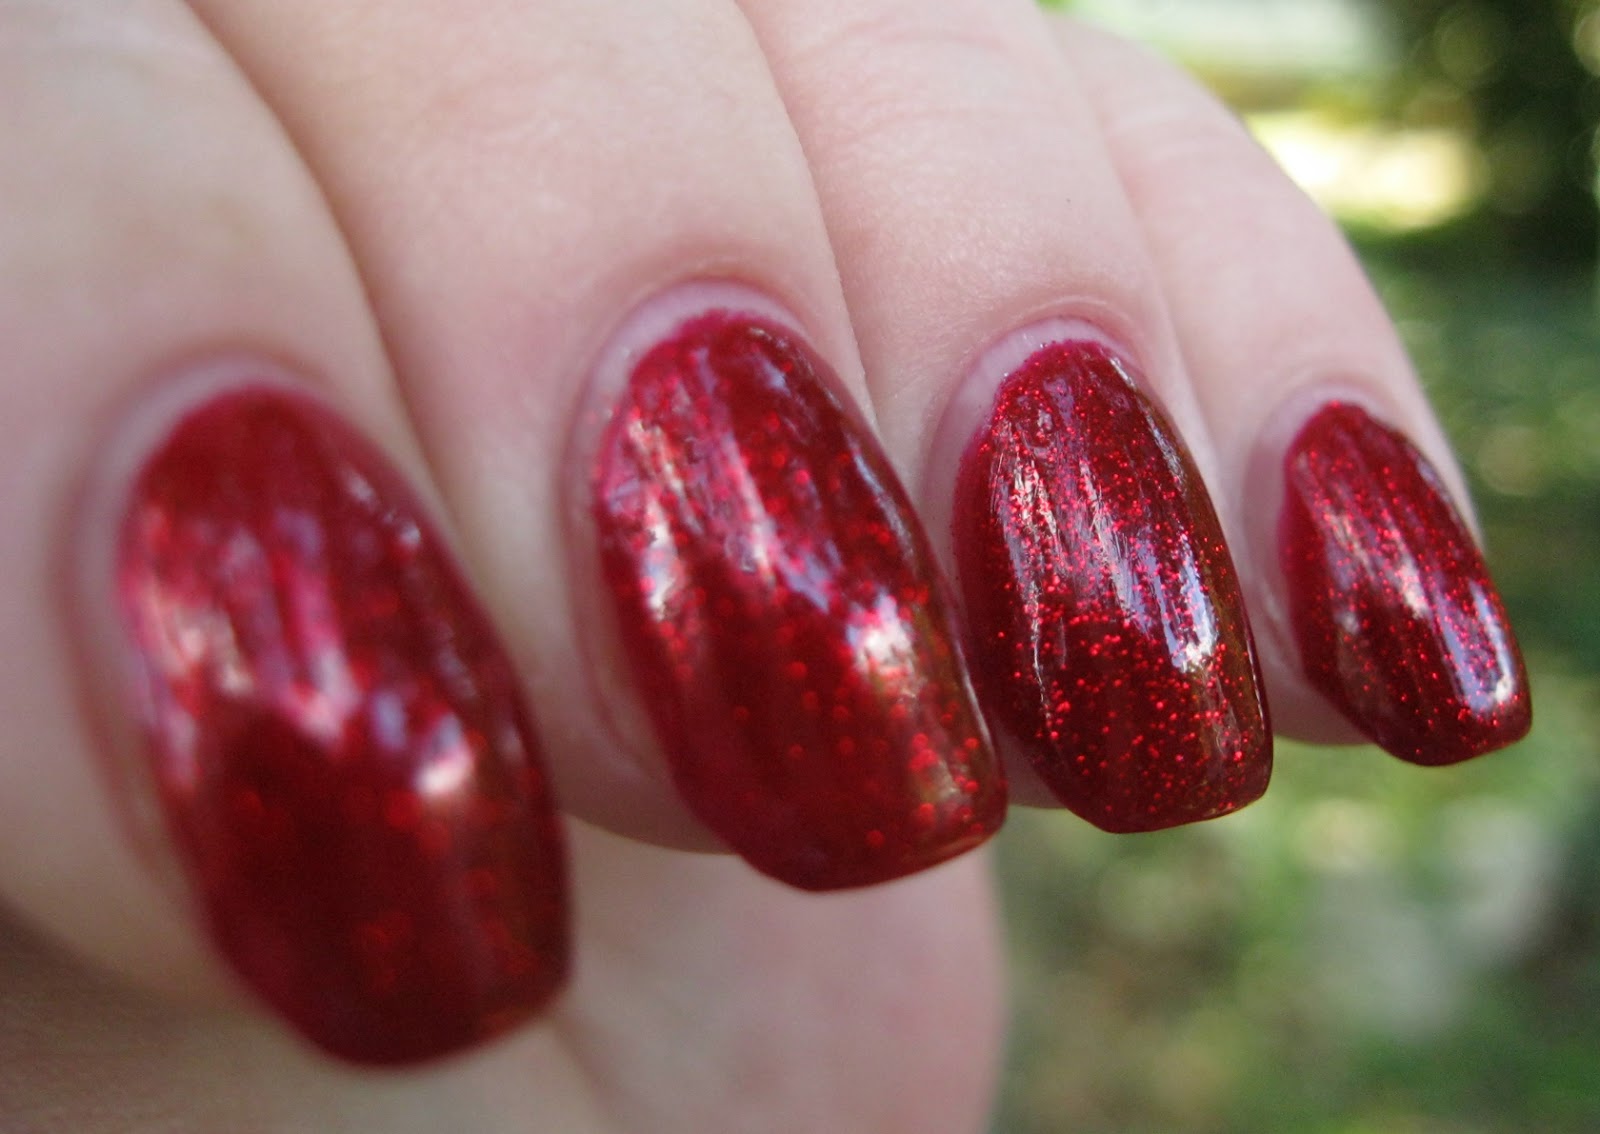 8. China Glaze Nail Lacquer in "Ruby Pumps" - wide 8